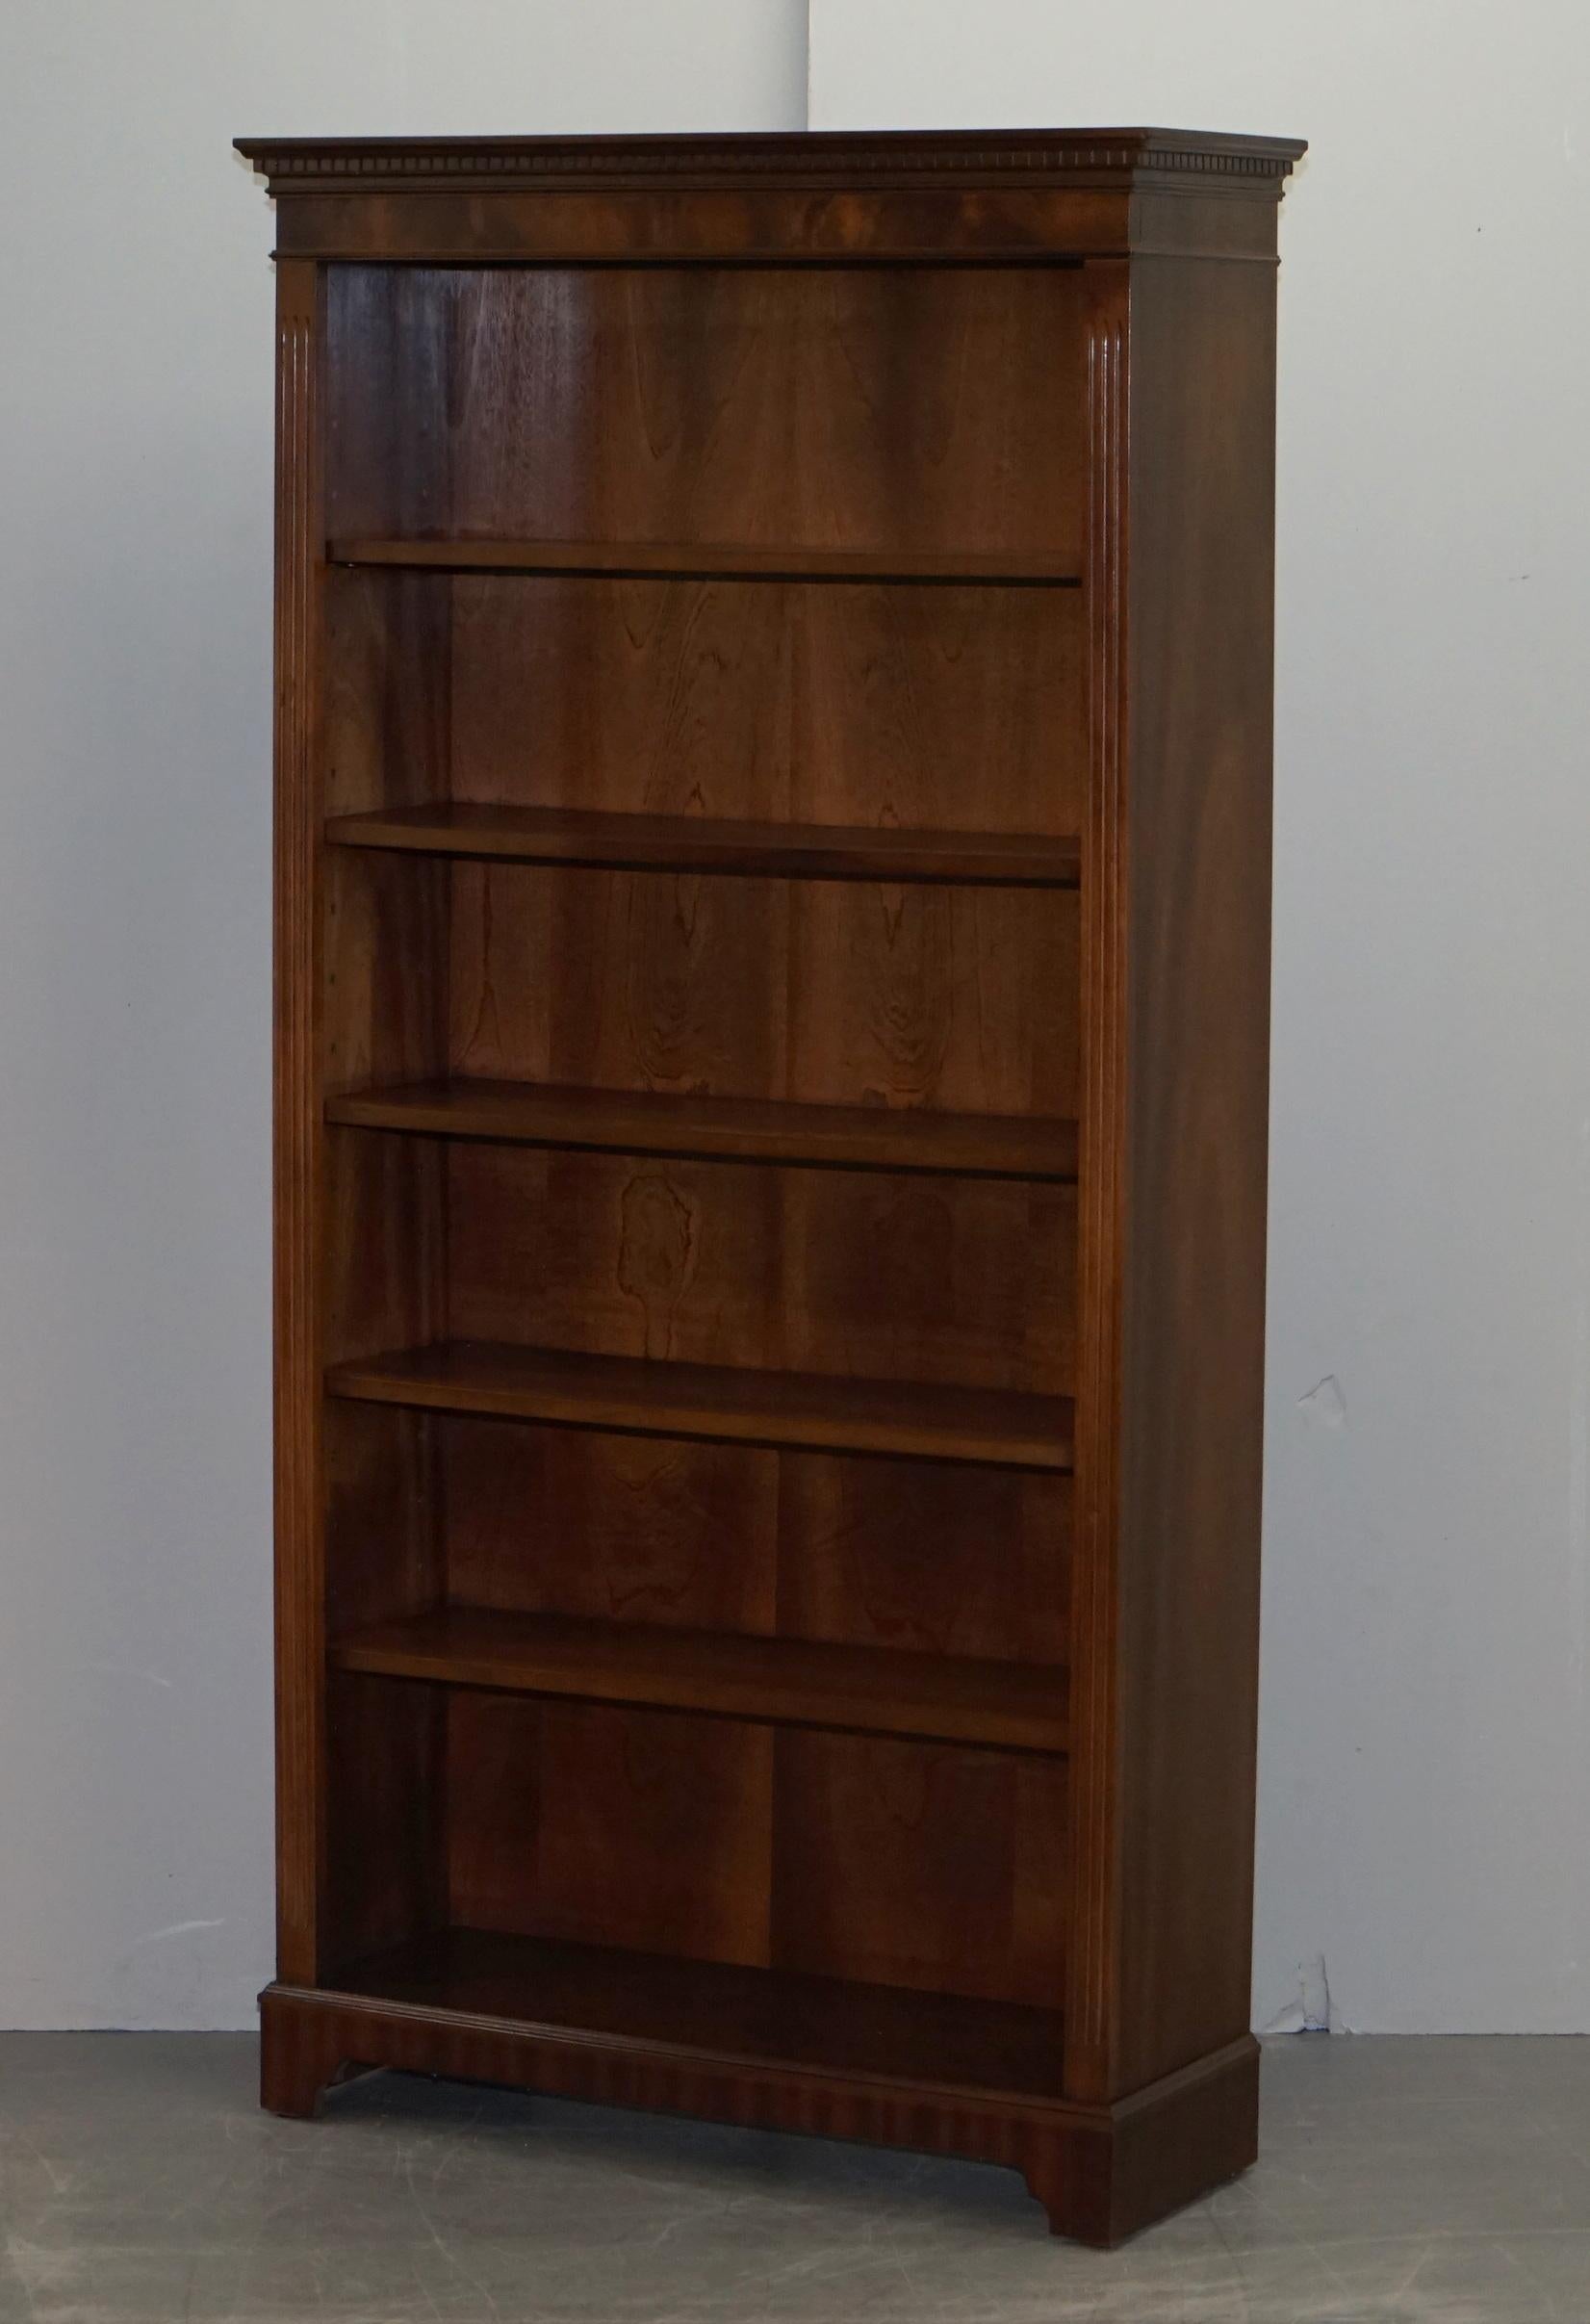 We are delighted to offer for sale this stunning pair of handmade in England flamed mahogany Library bookcases with height adjustable shelves

A good looking well made pair, ideally suited for any setting really, at home library or living